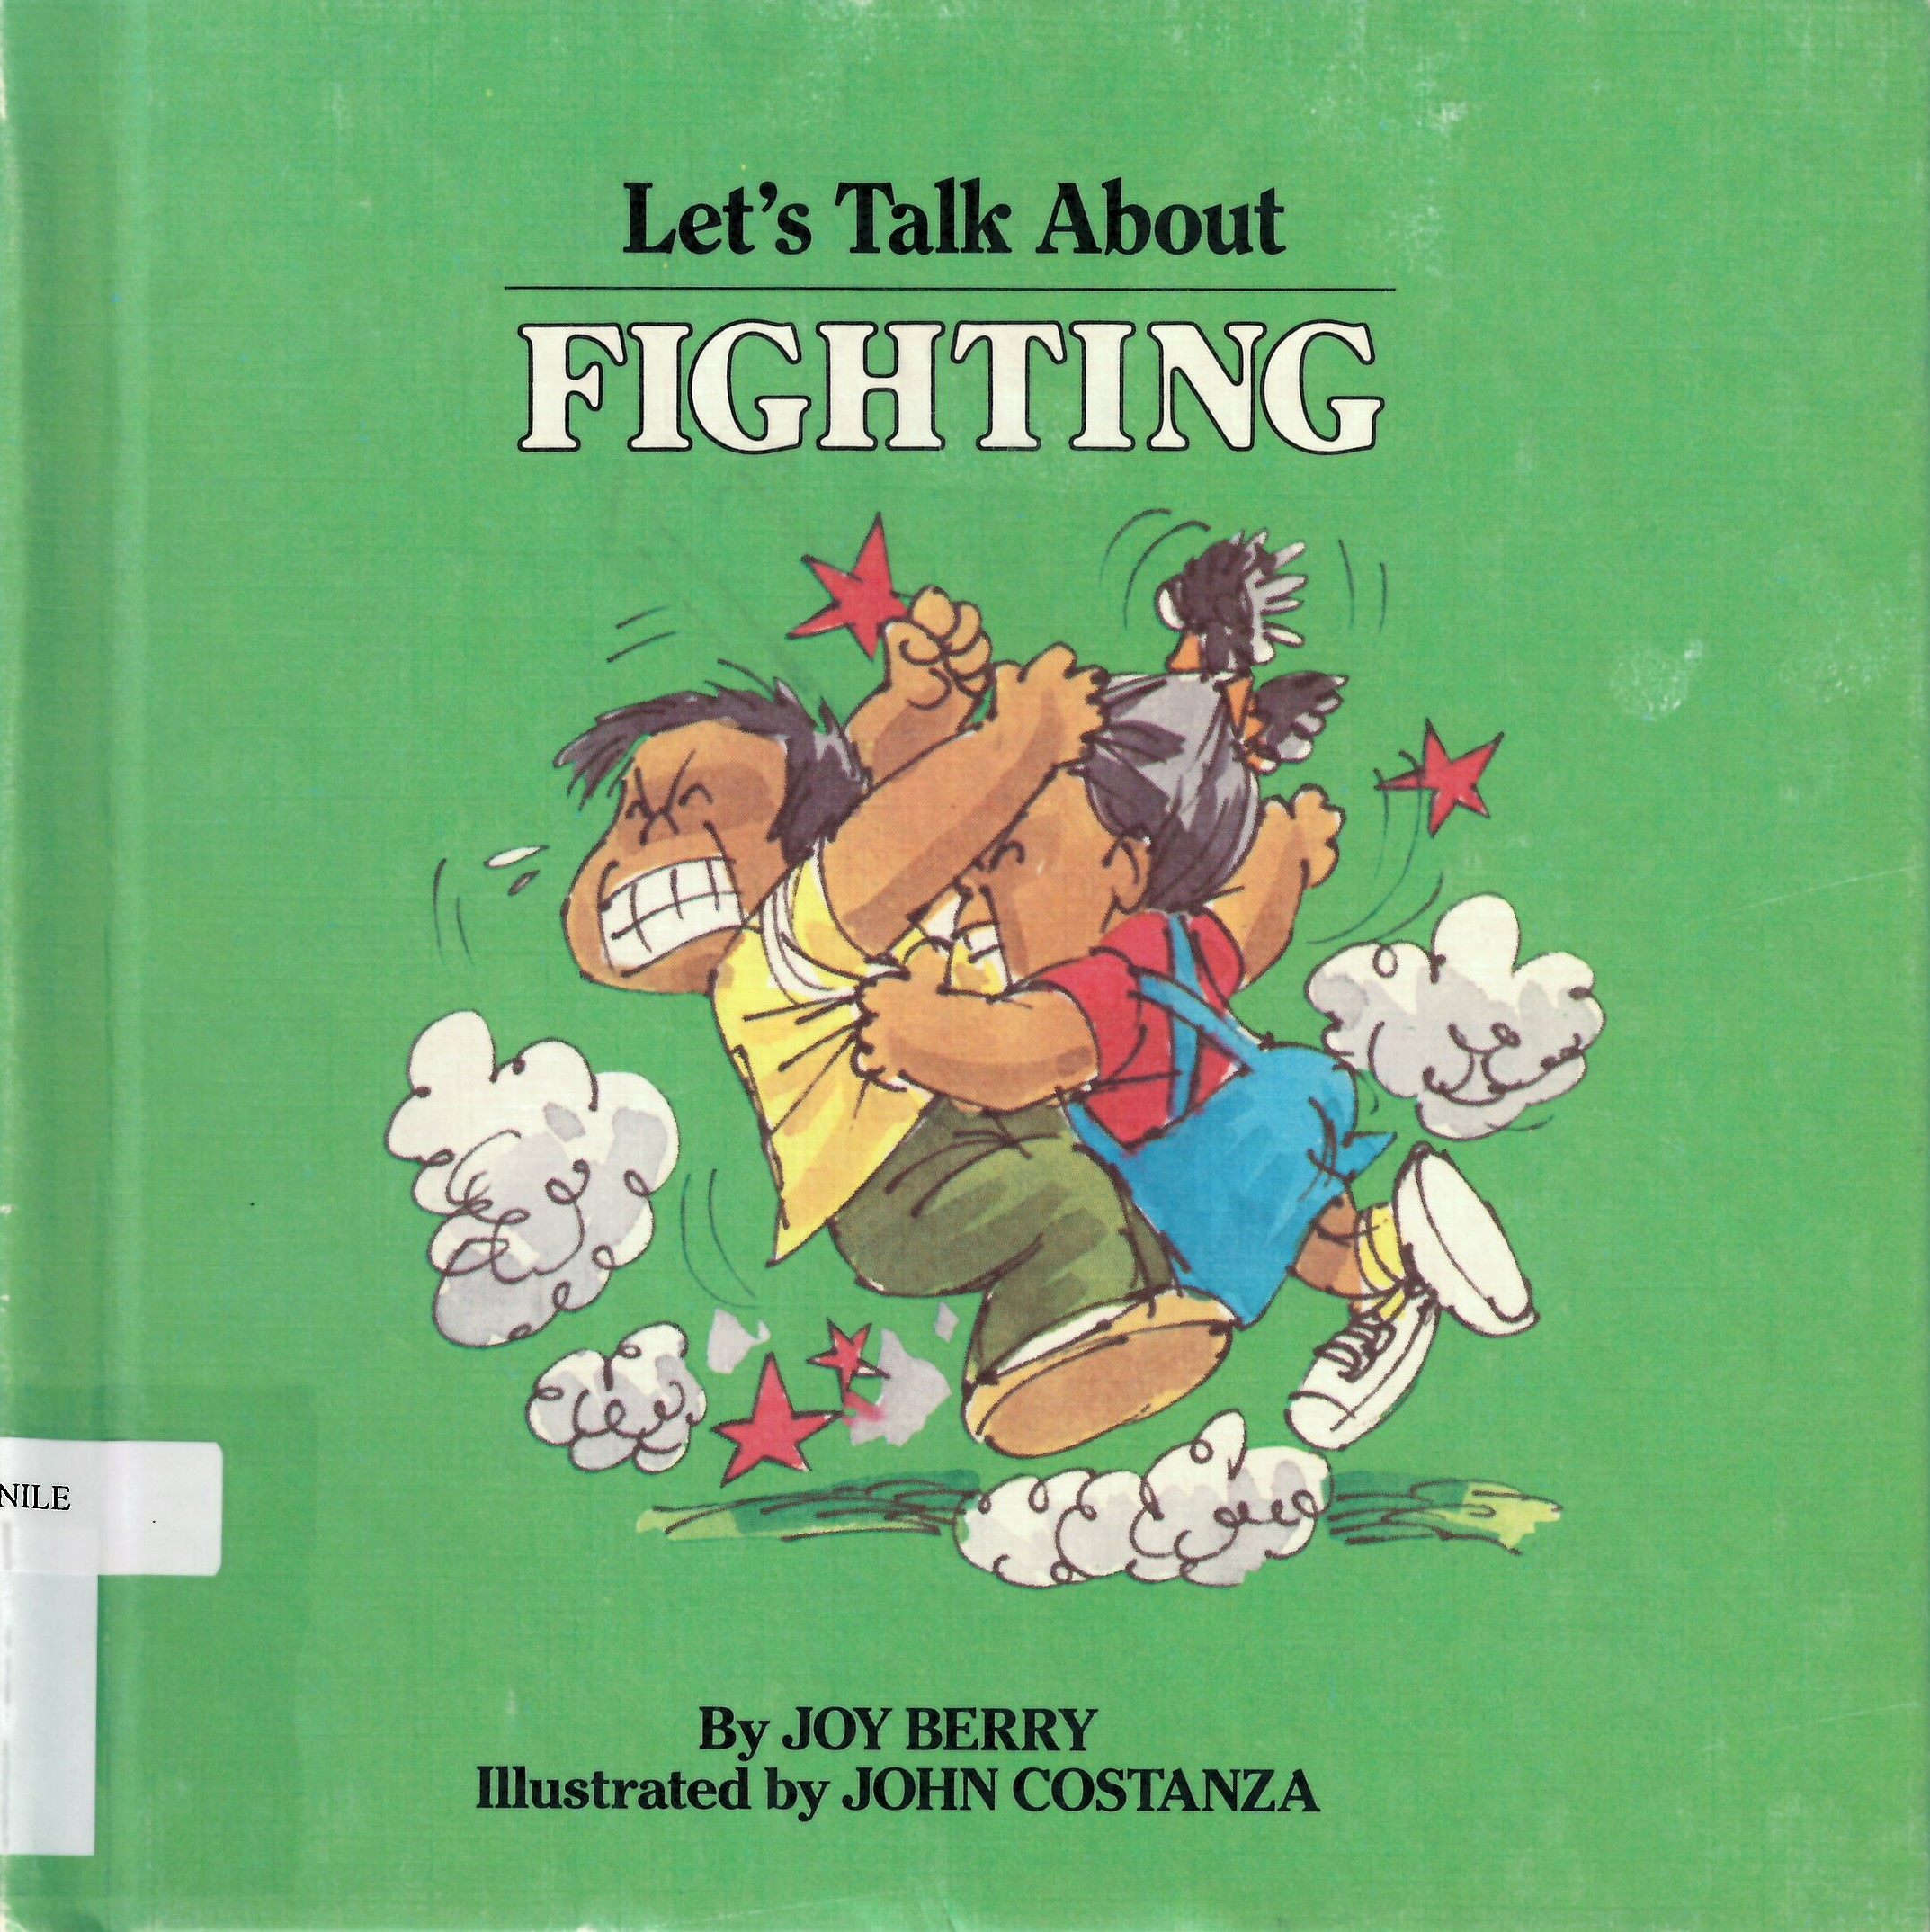 Let's talk about fighting